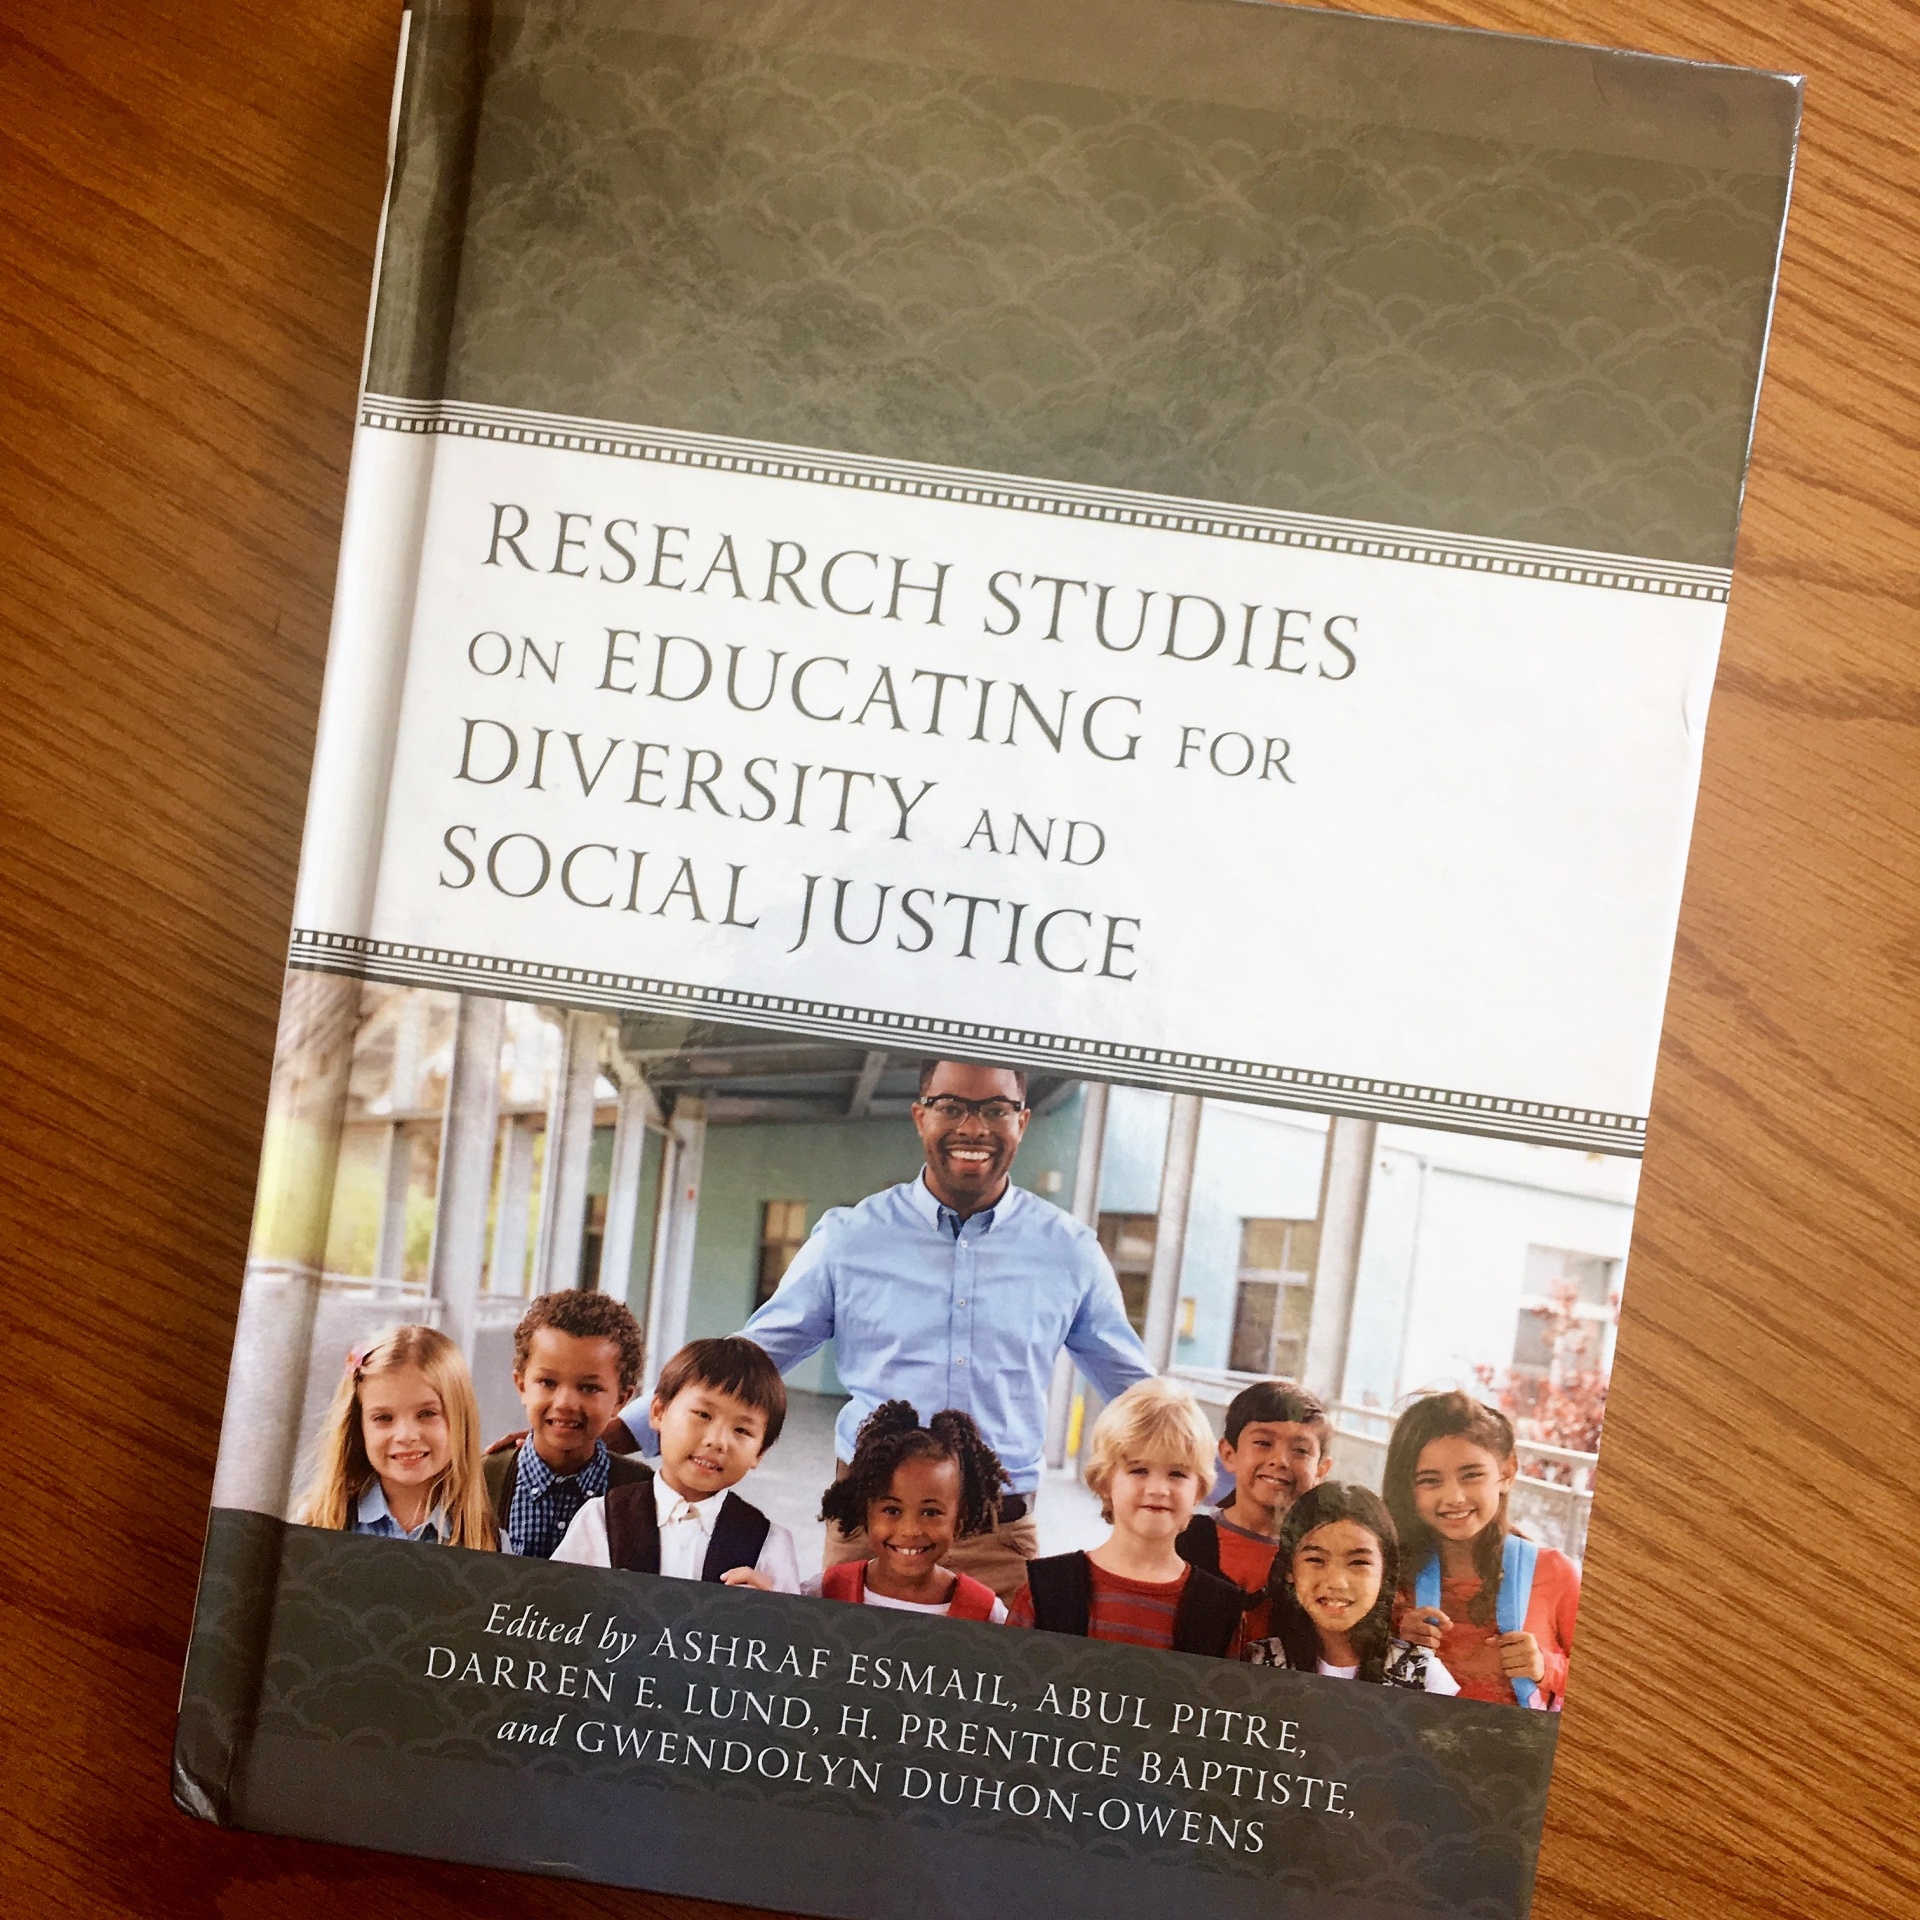 Cover of Book "Research Studies on Educating for Diversity a